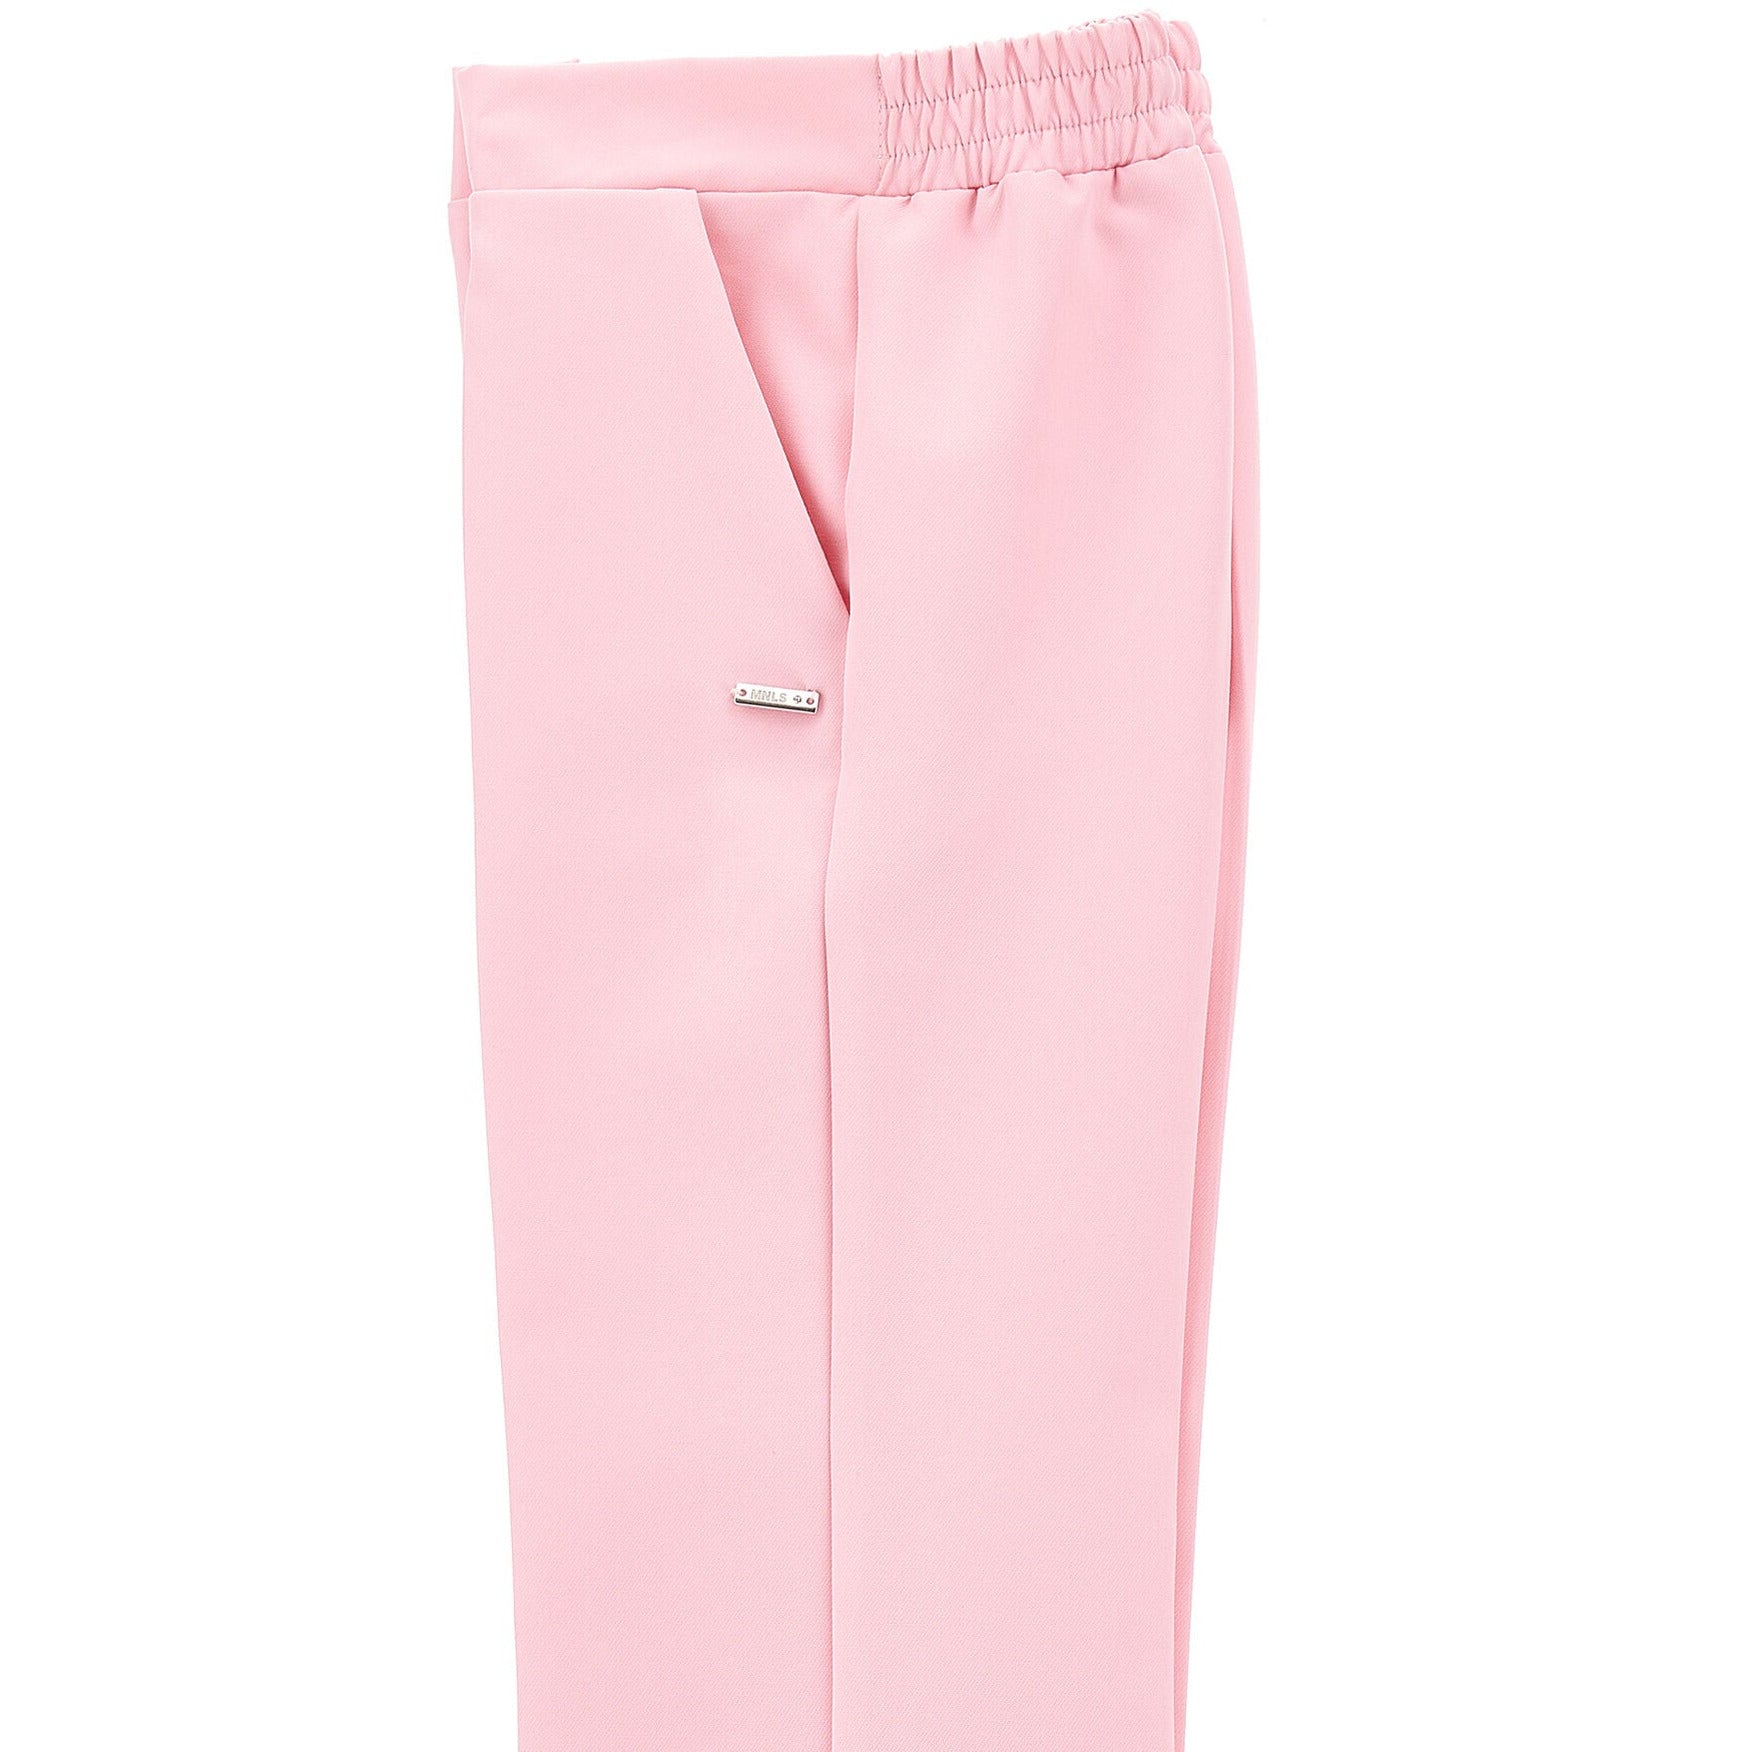 CREPE PALAZZO TROUSERS but